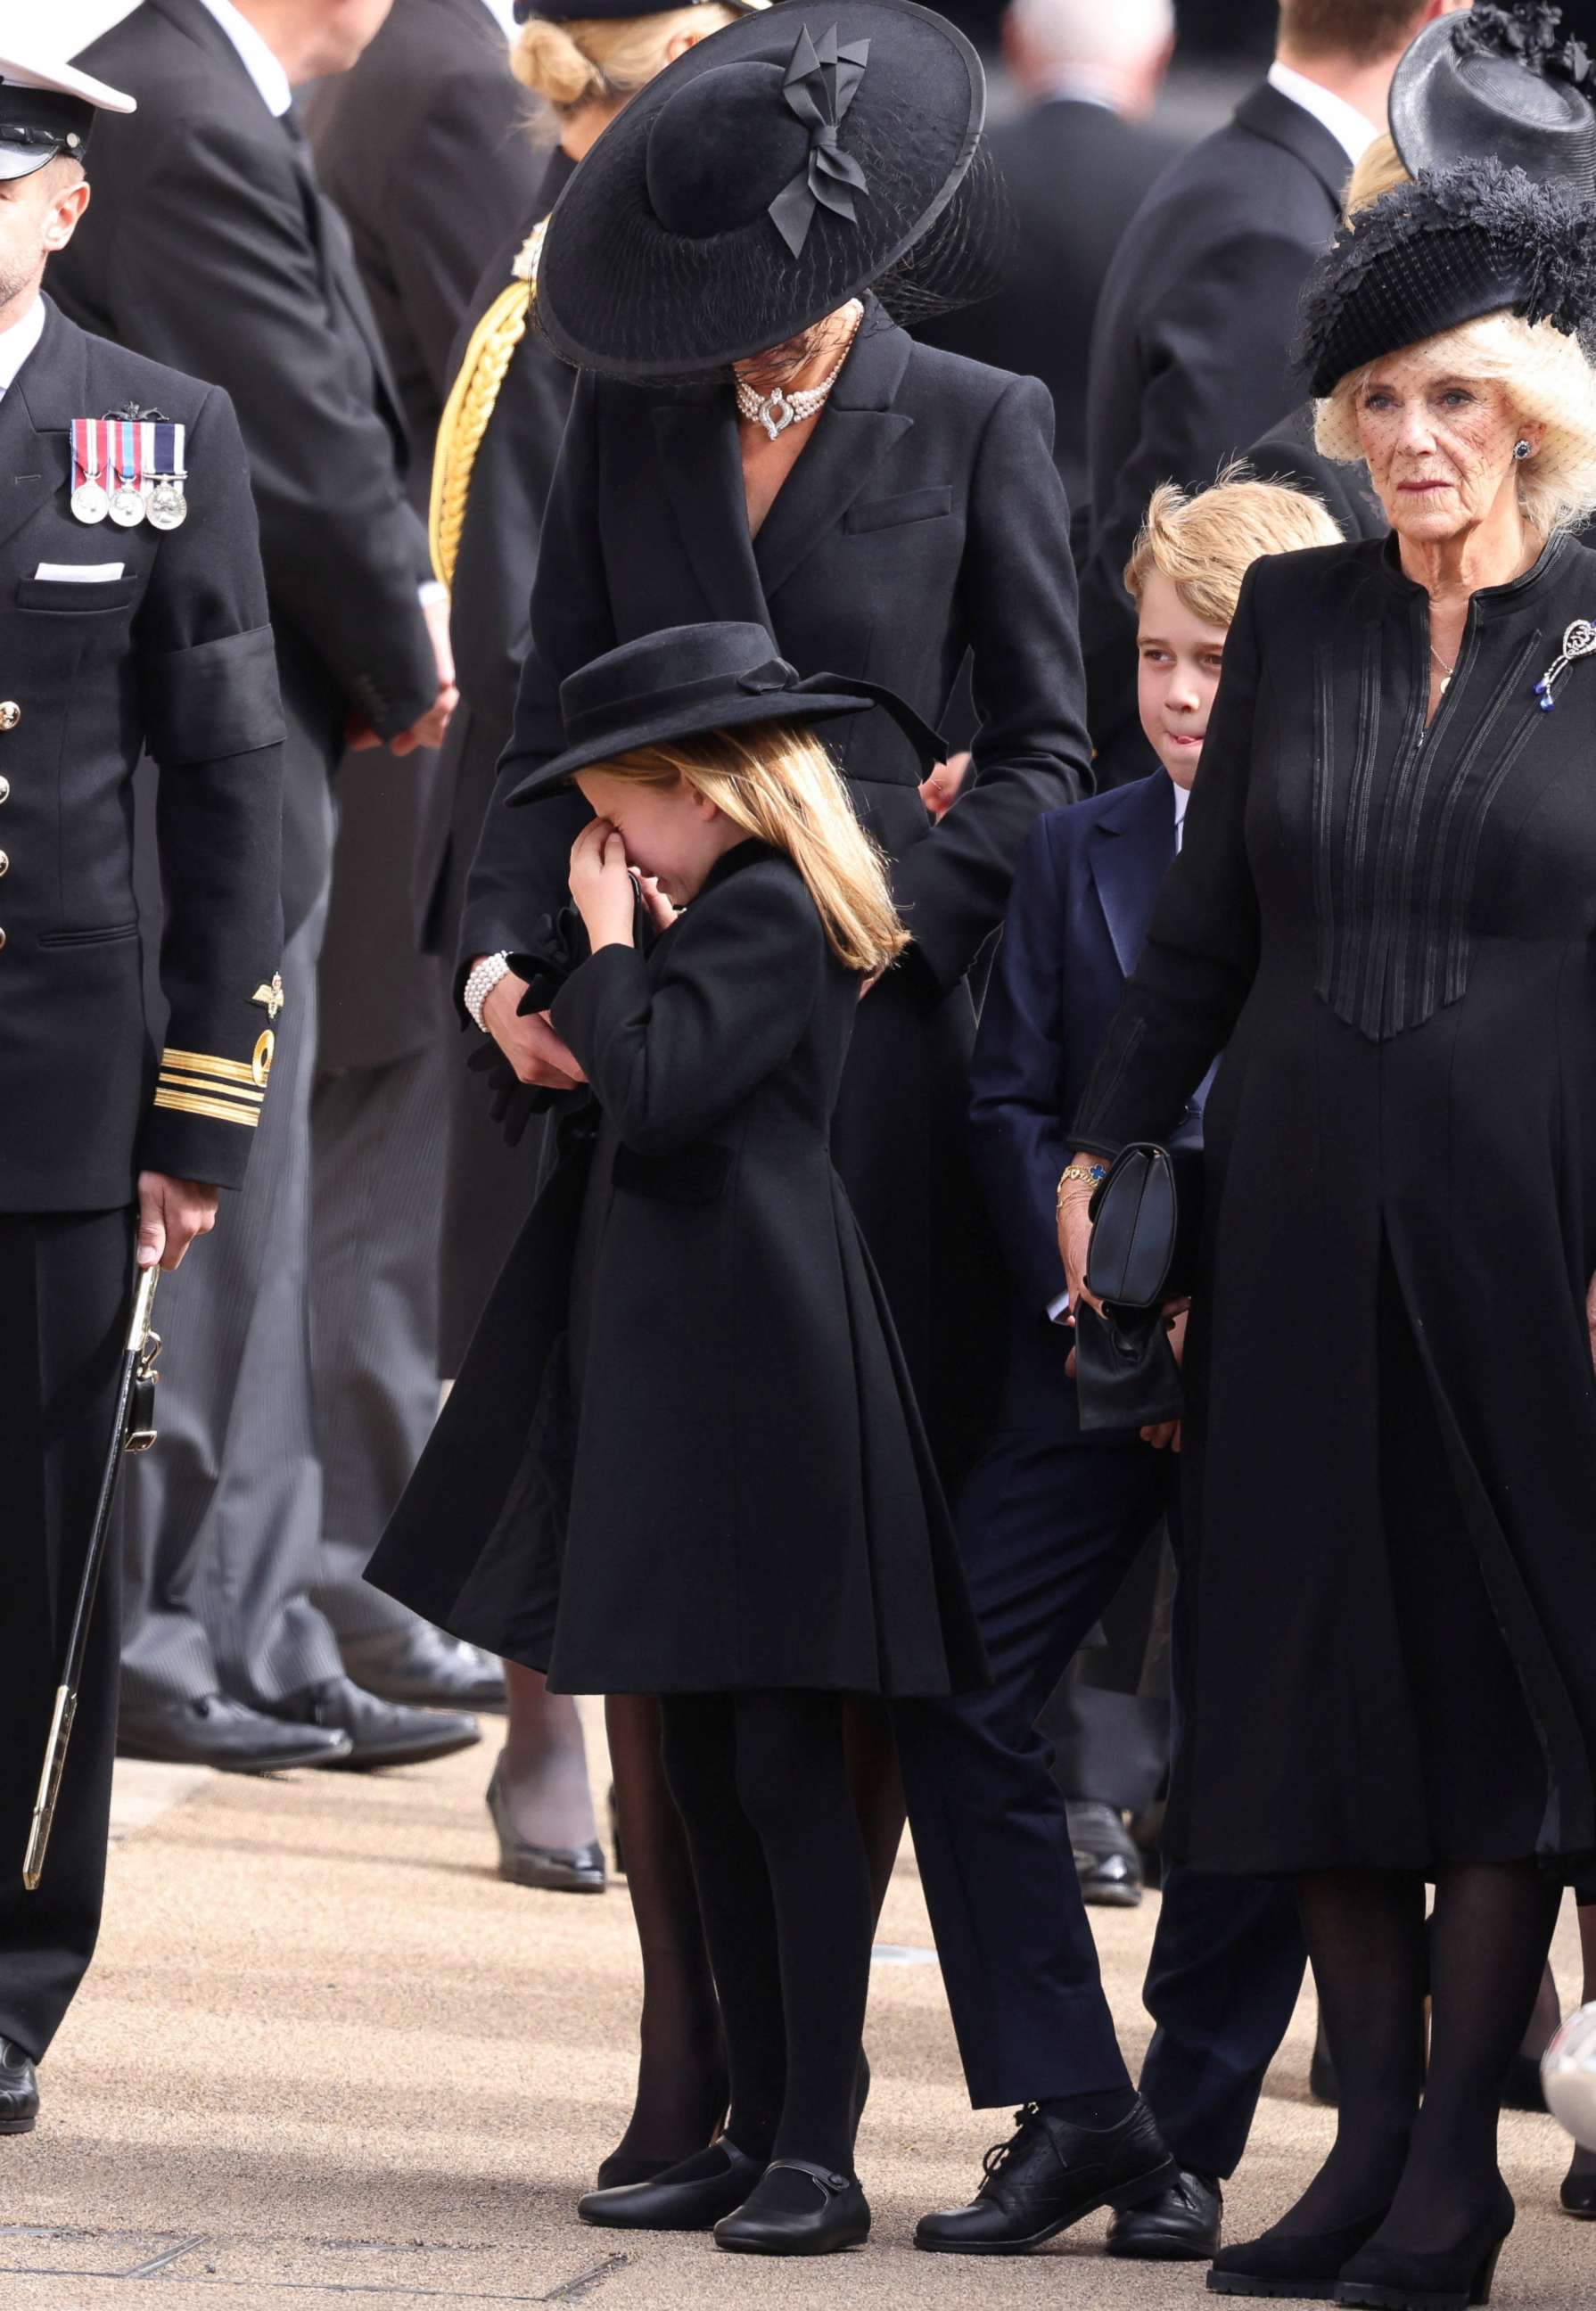 PHOTO: Camilla, the Queen Consort, Princess Charlotte and Prince George attend the state funeral and burial of Queen Elizabeth II, in London, Sept. 19, 2022.